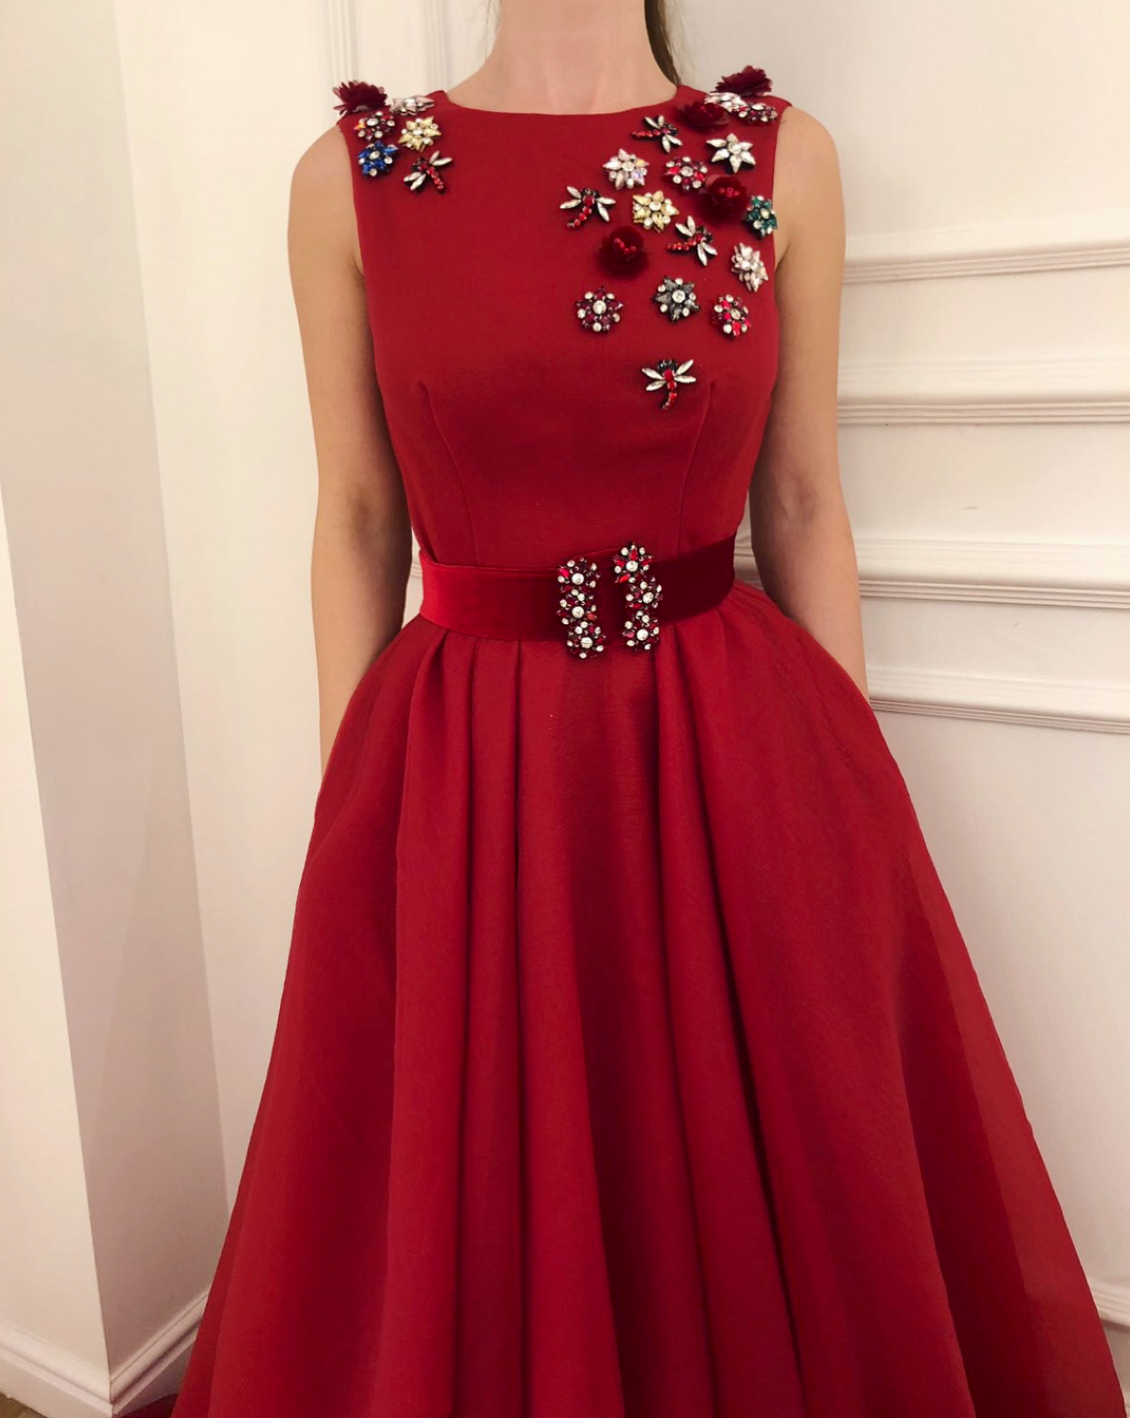 Red A-Line dress with belt, no sleeves and embroidery